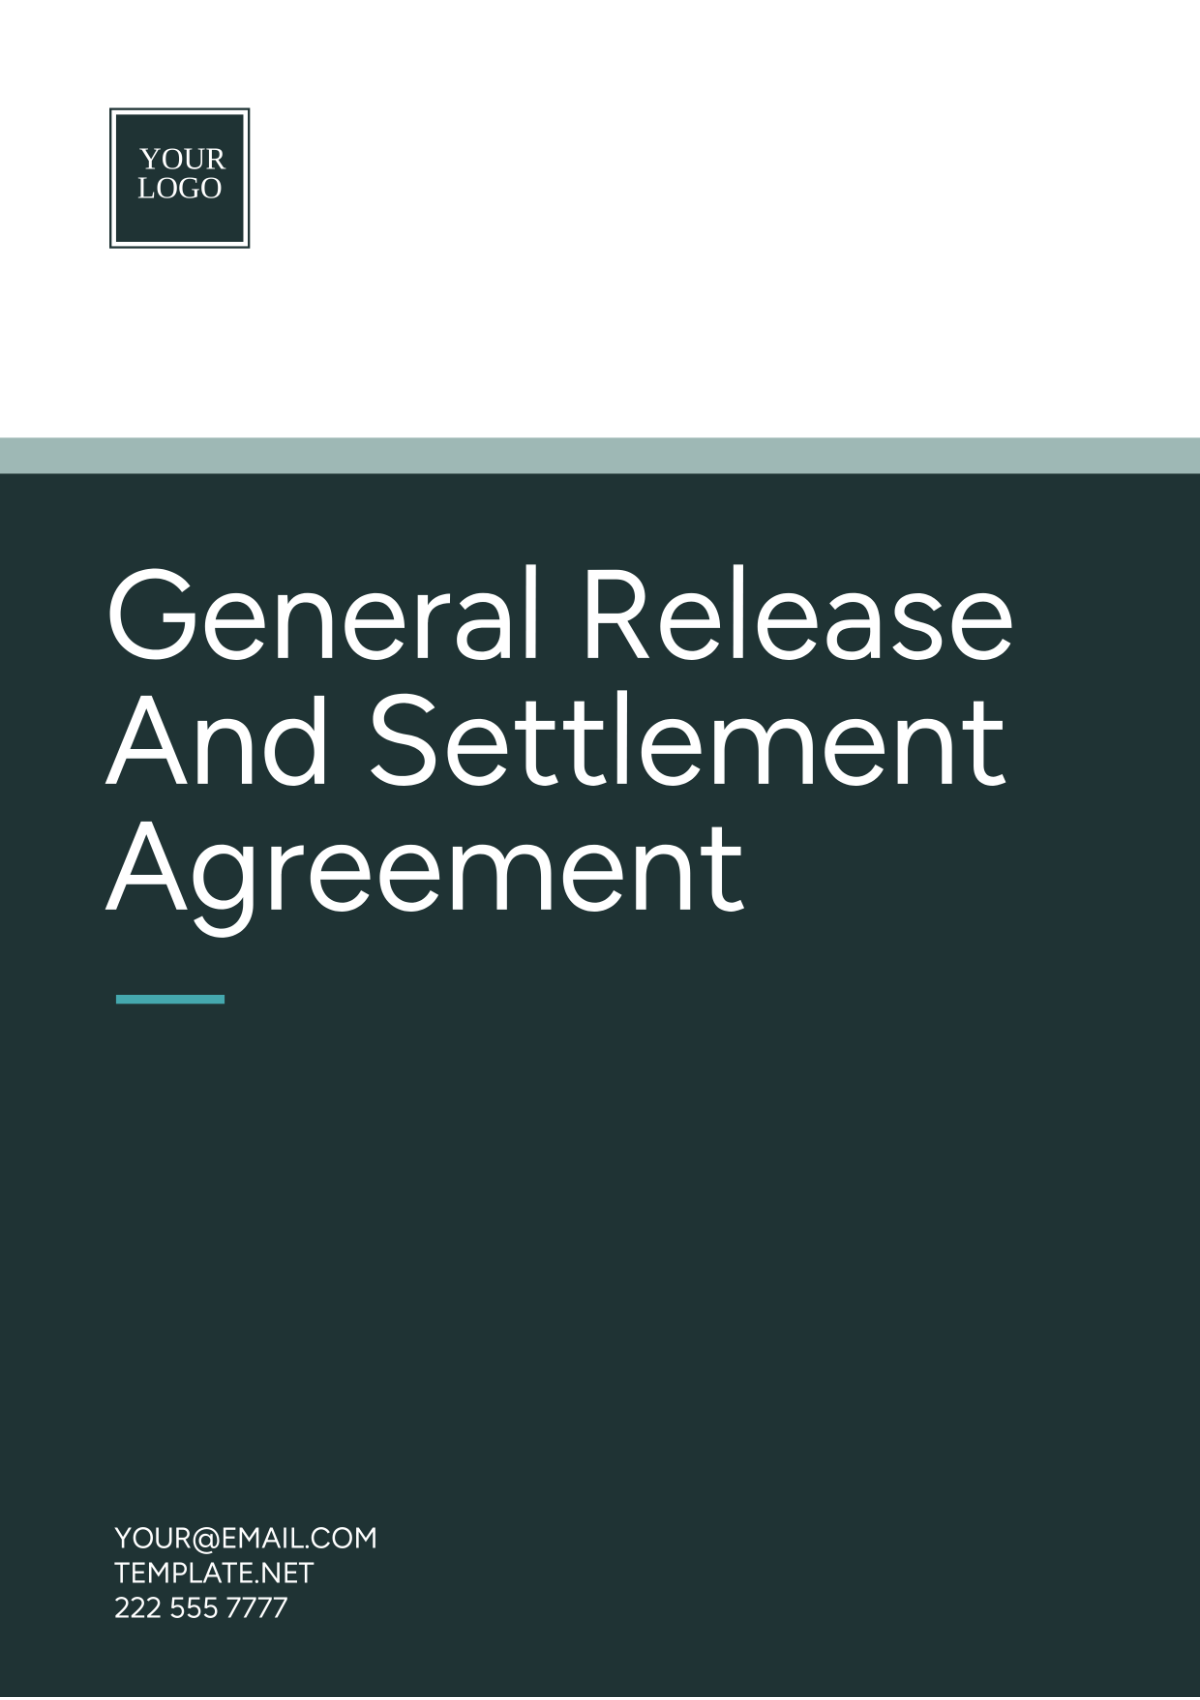 Free General Release And Settlement Agreement Template